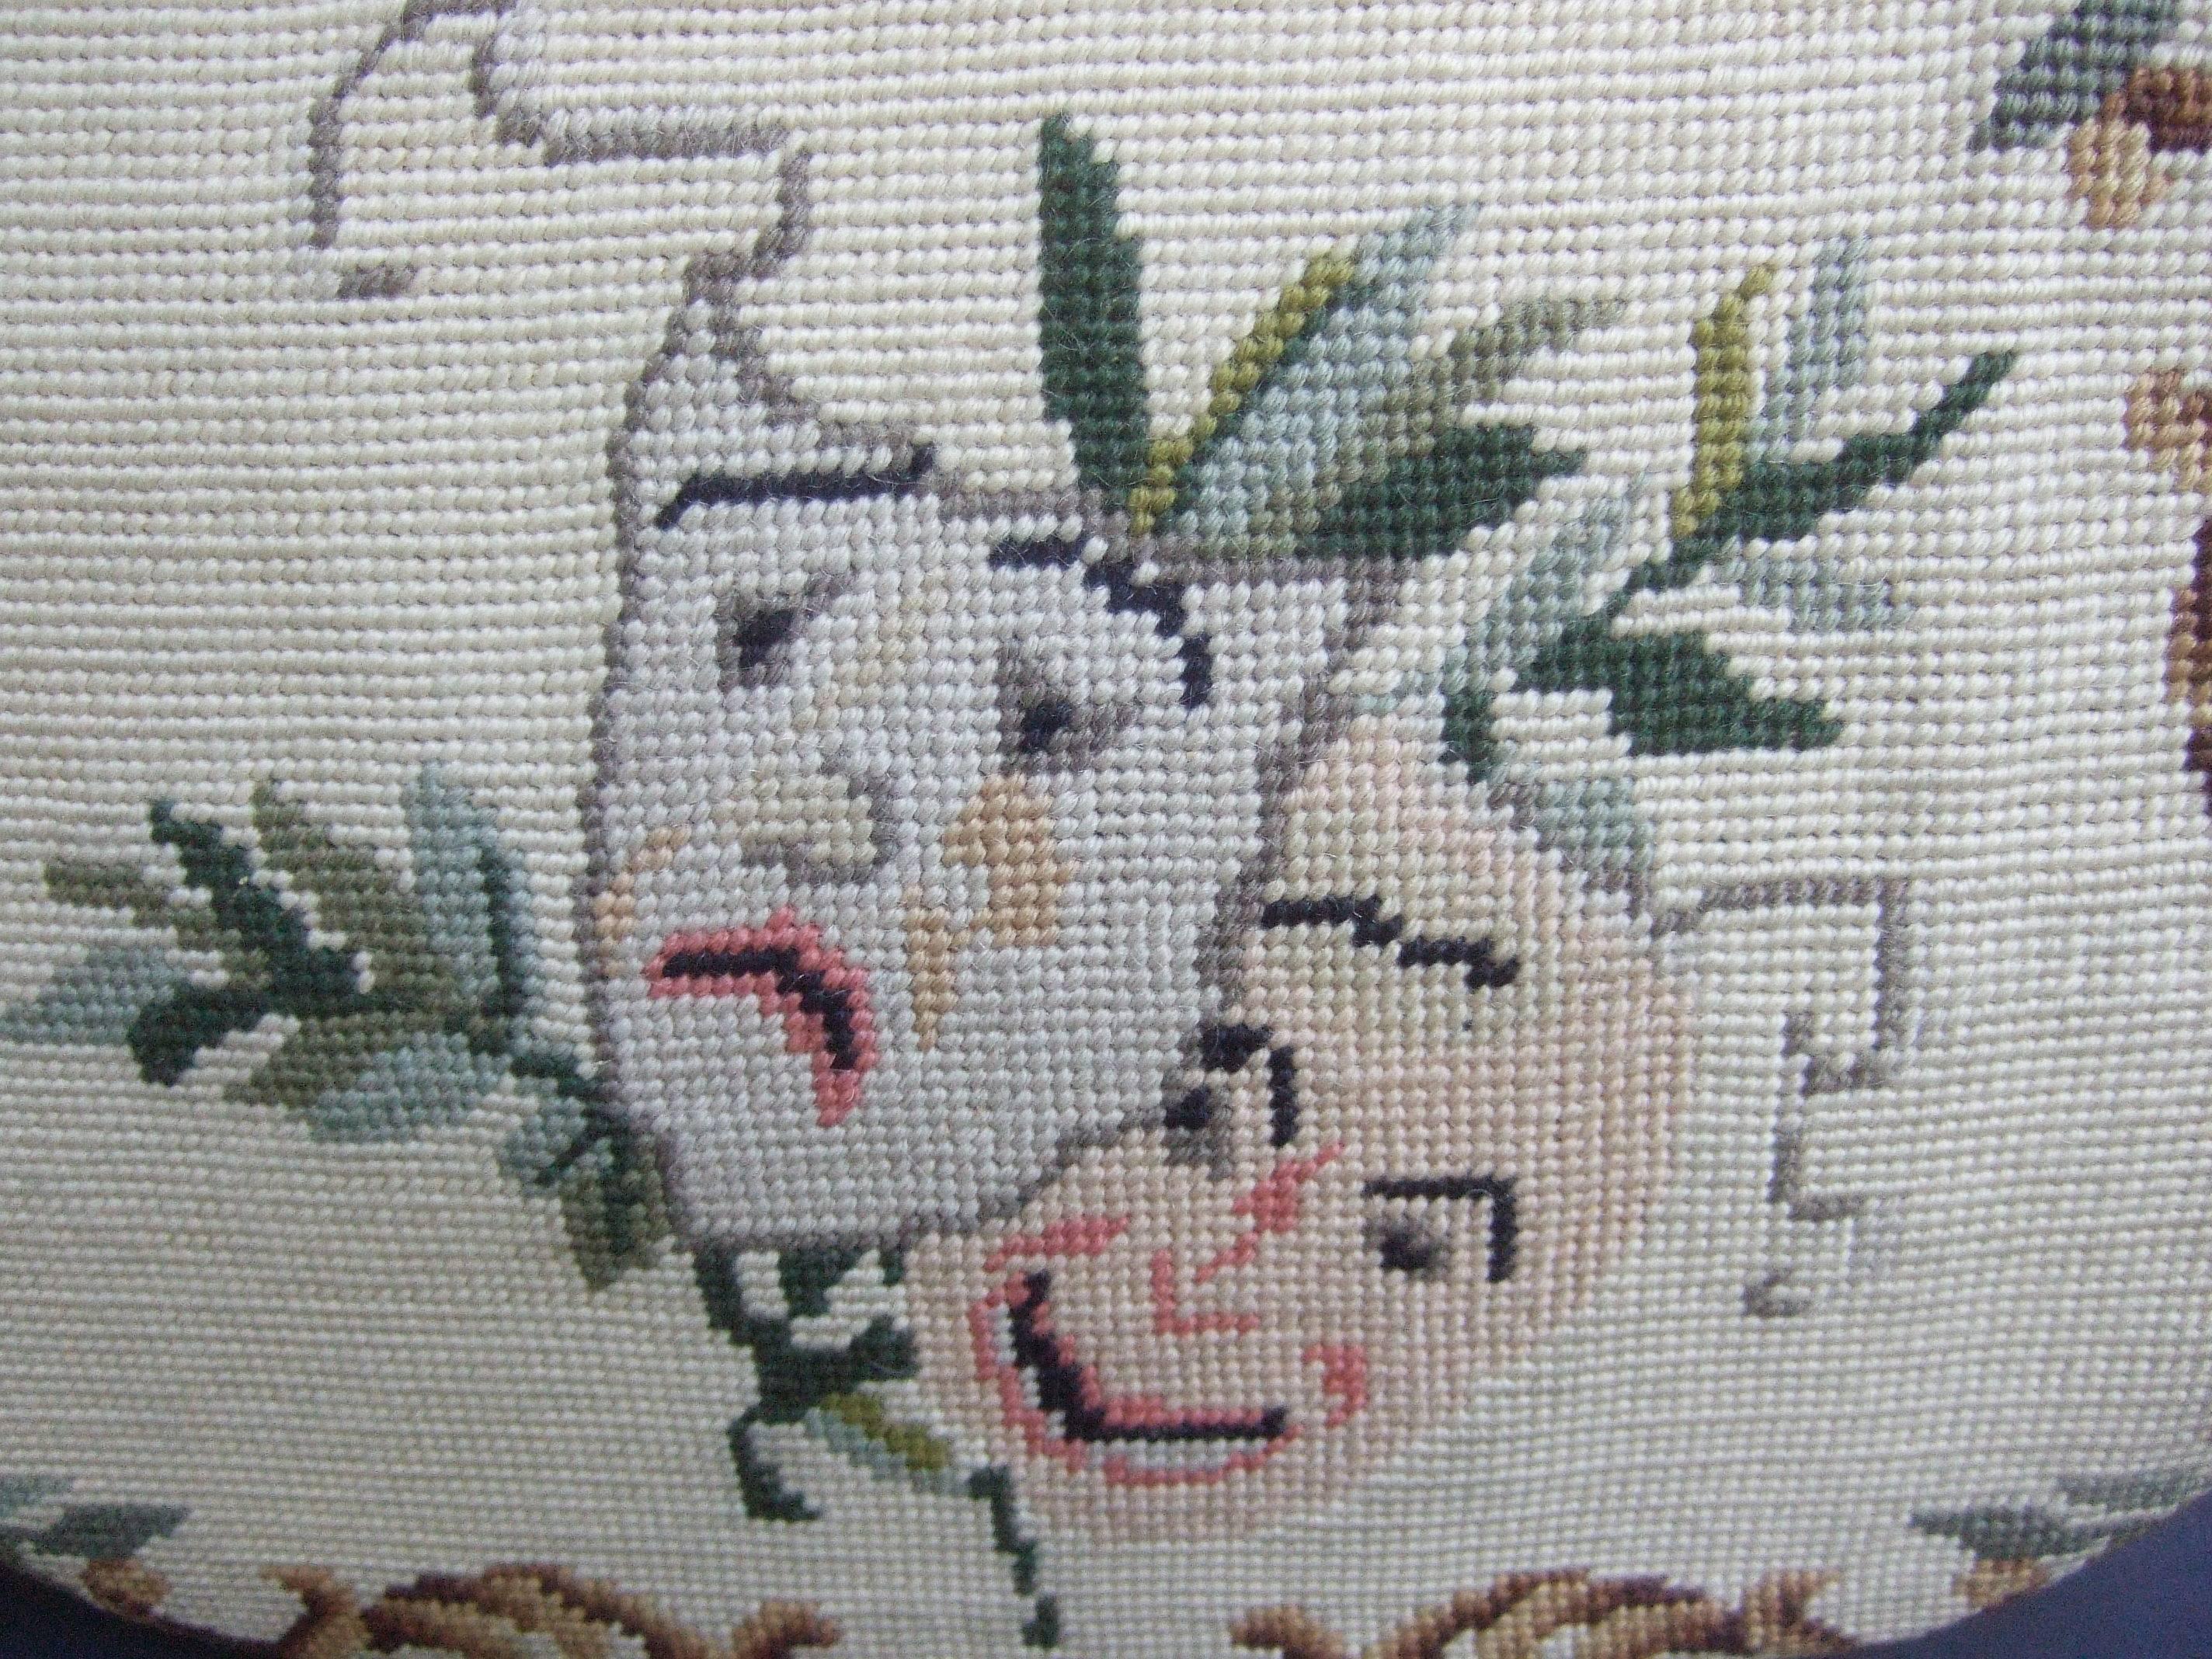 Unique thespian needlepoint comedy and tragedy handbag
The stylish large scale retro handbag is designed 
with comedy and tragedy mask on both exterior 
sides

The theatrical masks are framed with leafy foliage
The handle and sides are